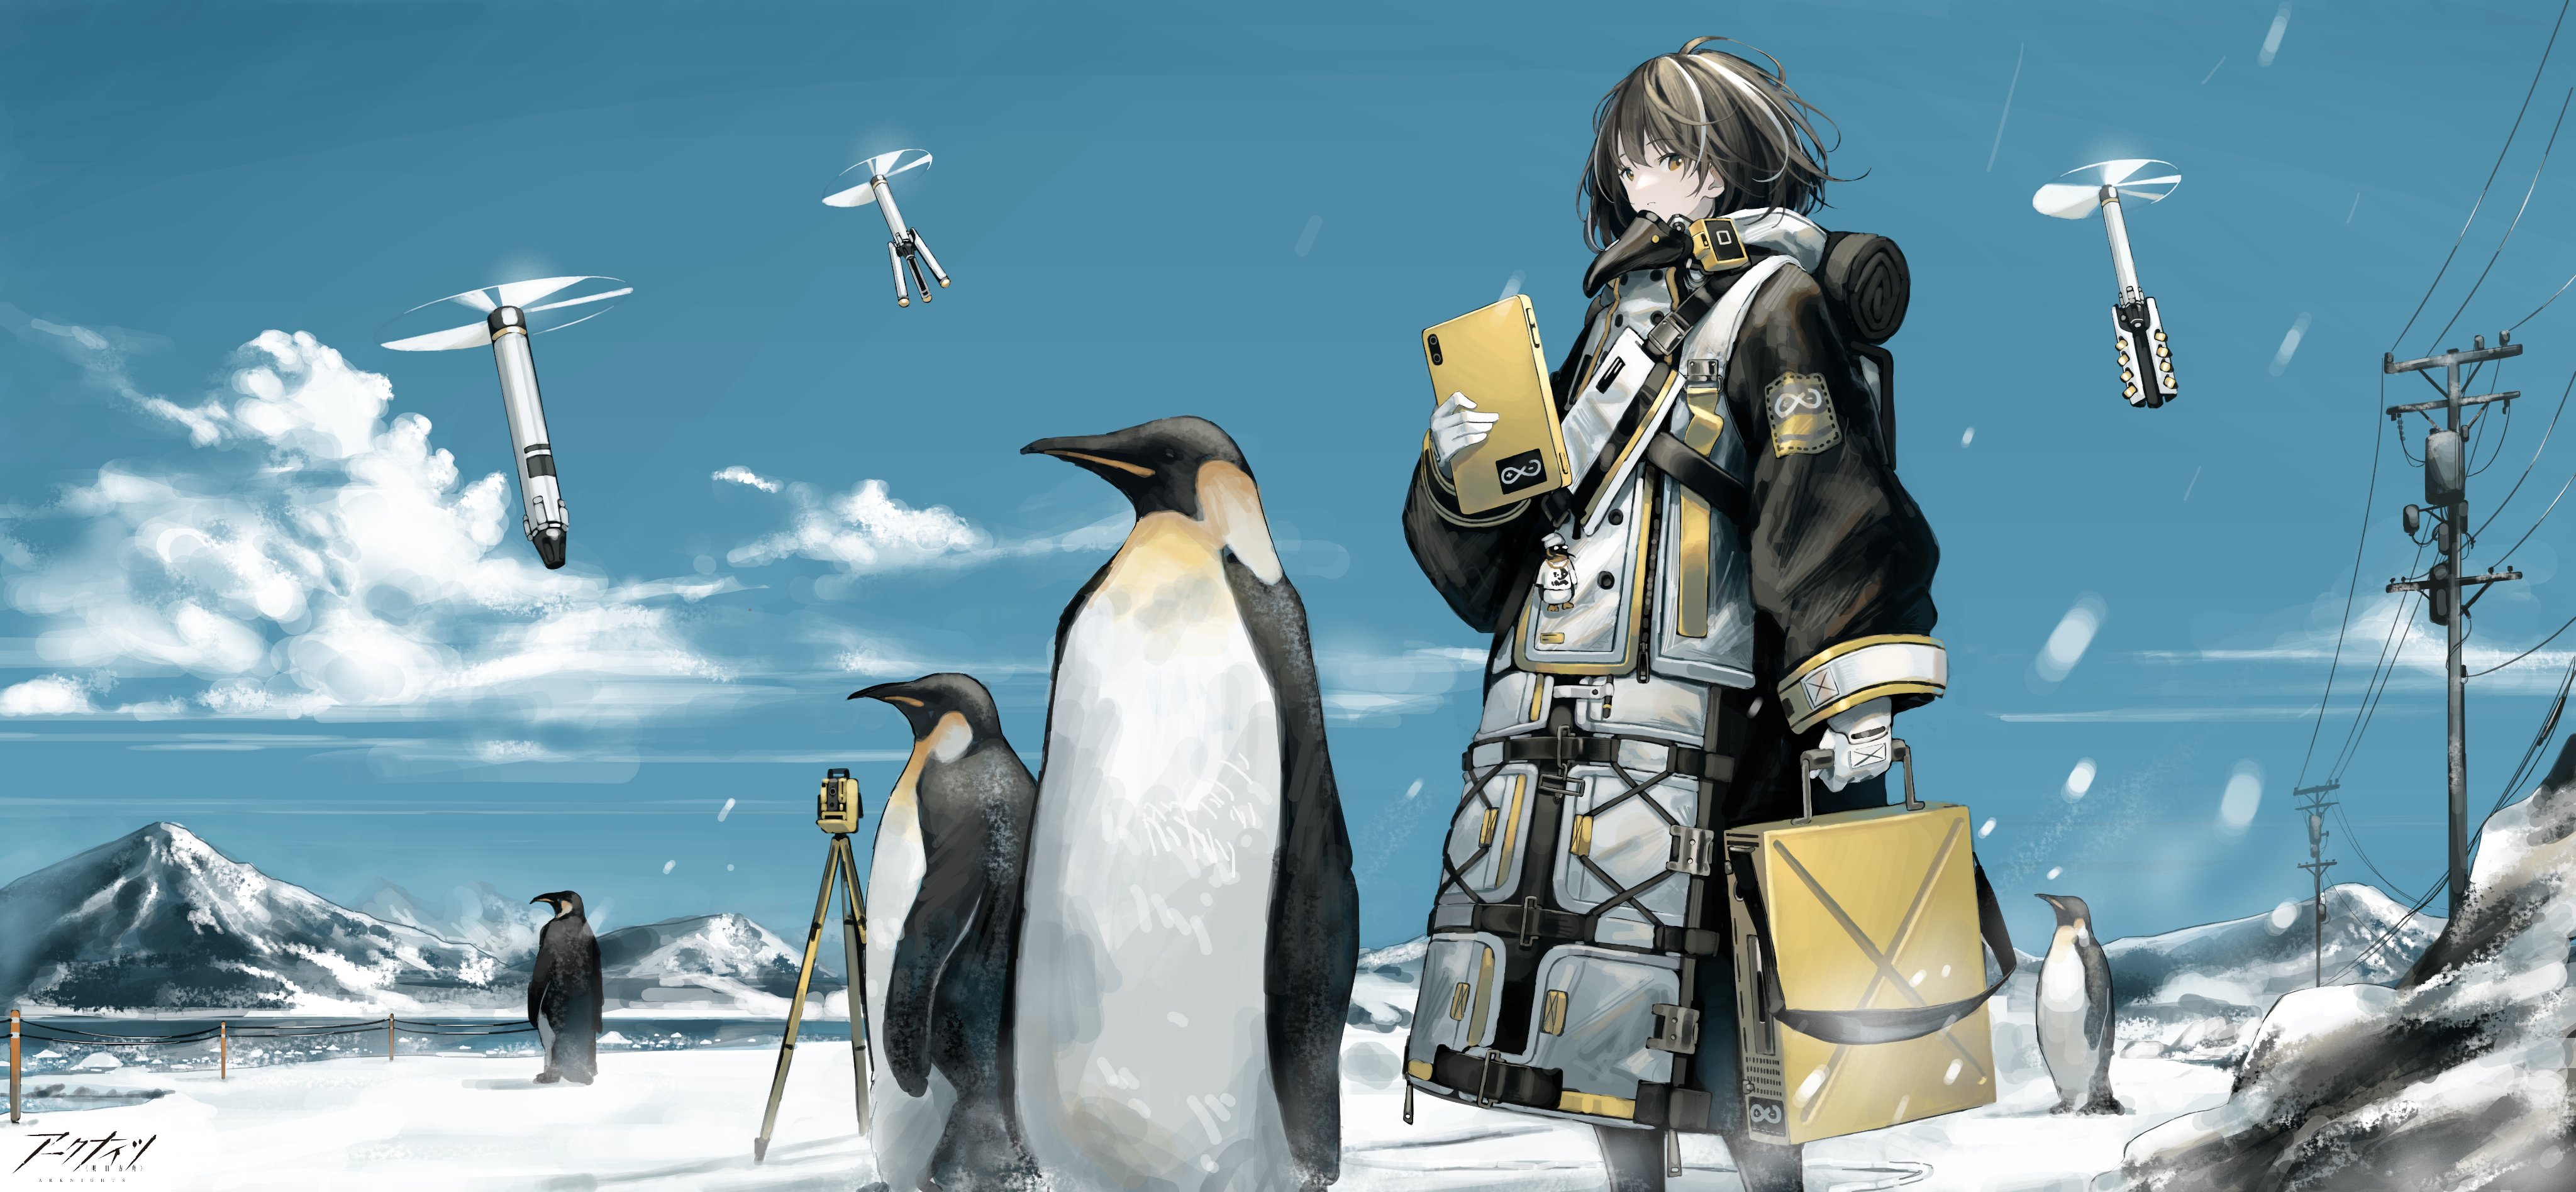 Anime Girls Arknights Penguins Snowing Snow Magallan Arknights Short Hair Sky Clouds Logo Japanese S 4096x1896